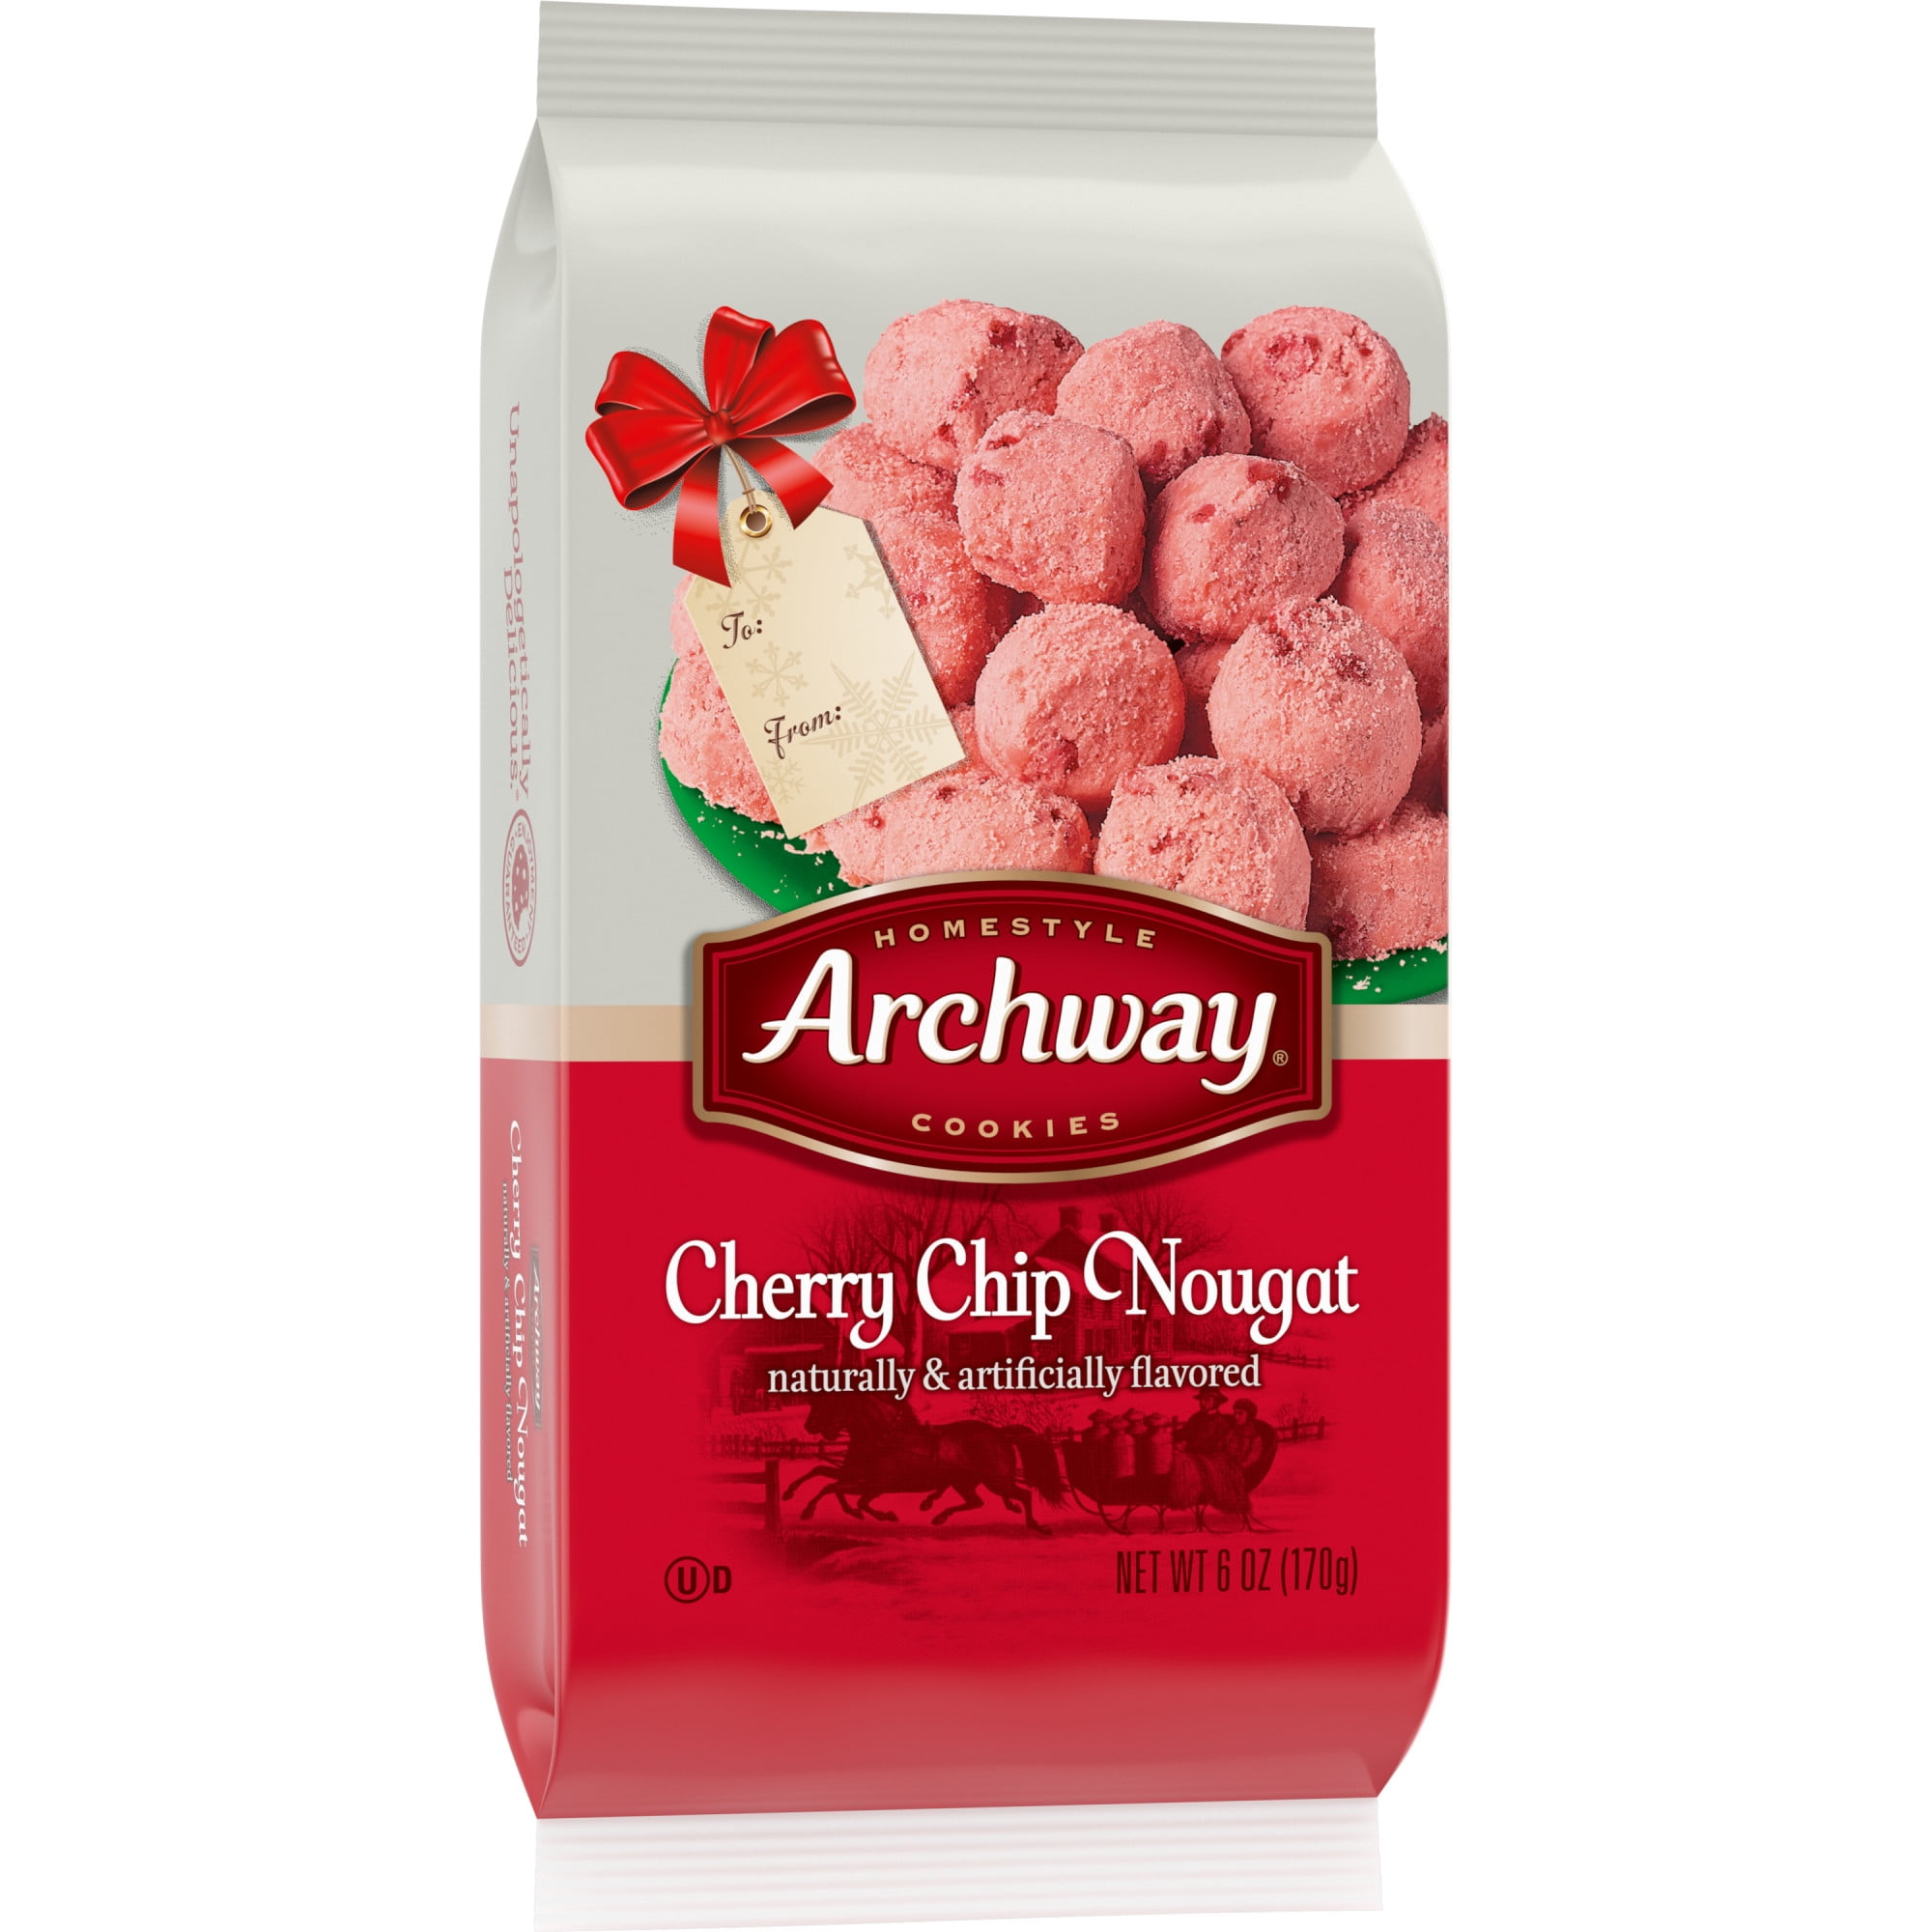 High value $1 1 archway cookies coupon. 